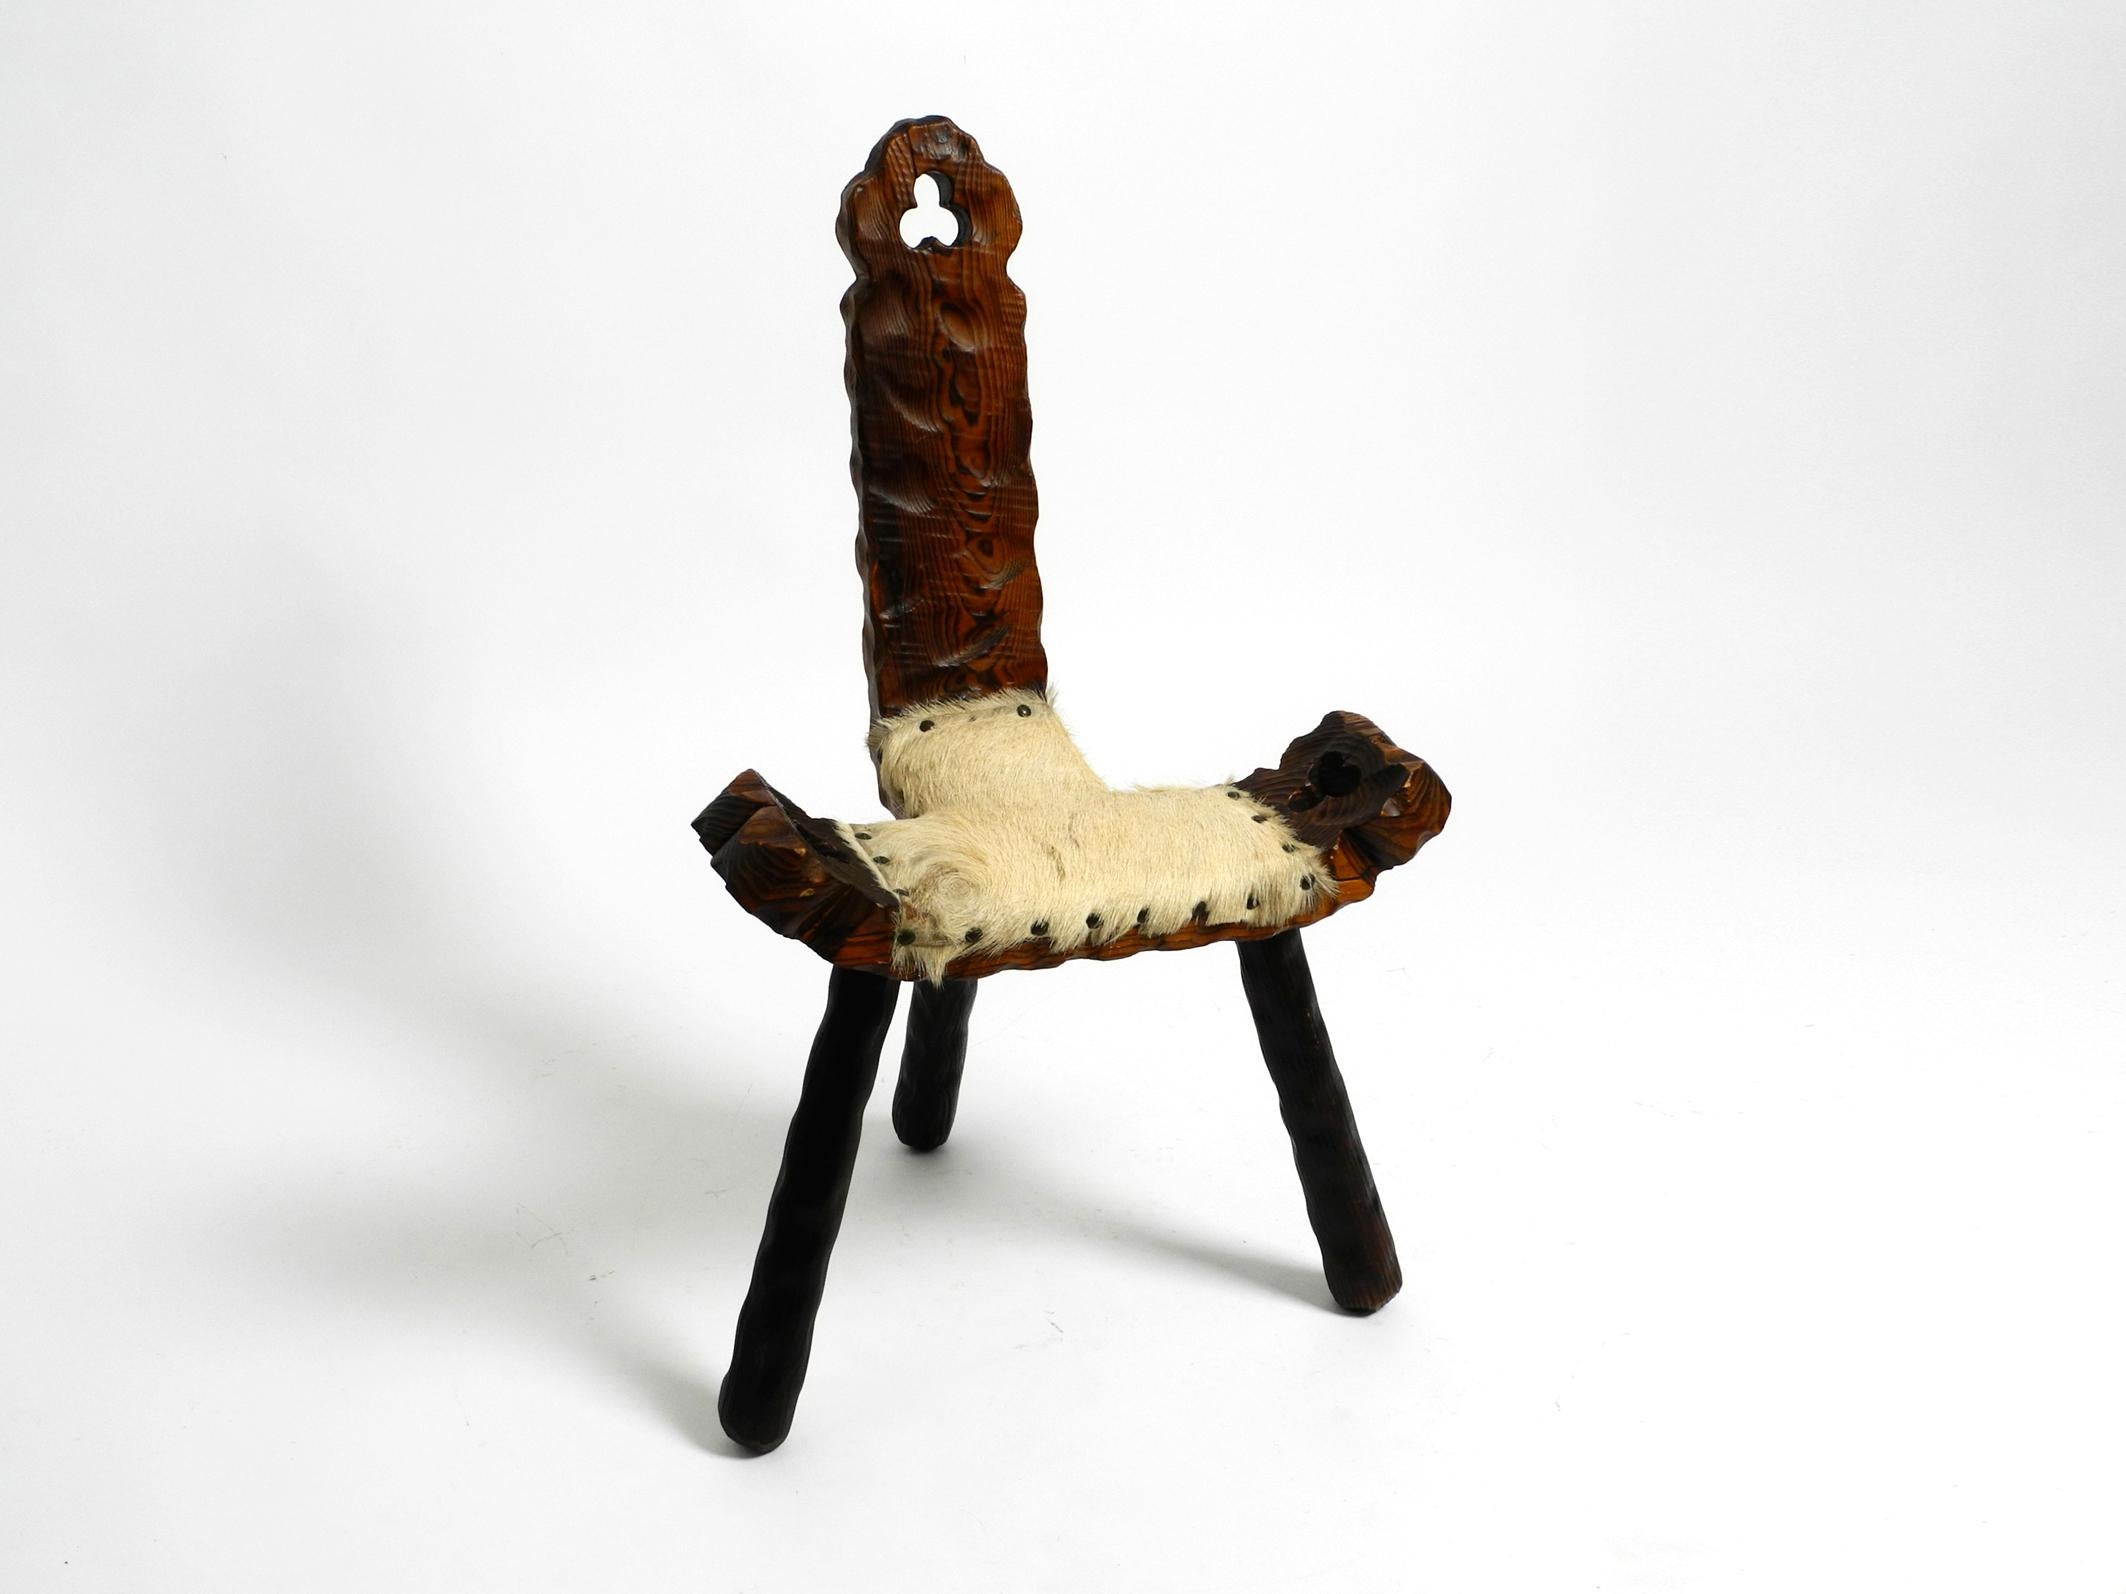 Beautiful Mid Century tripod stool with backrest made of solid pine wood in black-brown.
Seat is covered with cowhide and riveted.
High-quality hand carved workmanship with lots of details
Undamaged vintage condition.
No woodworm damage. No cracks